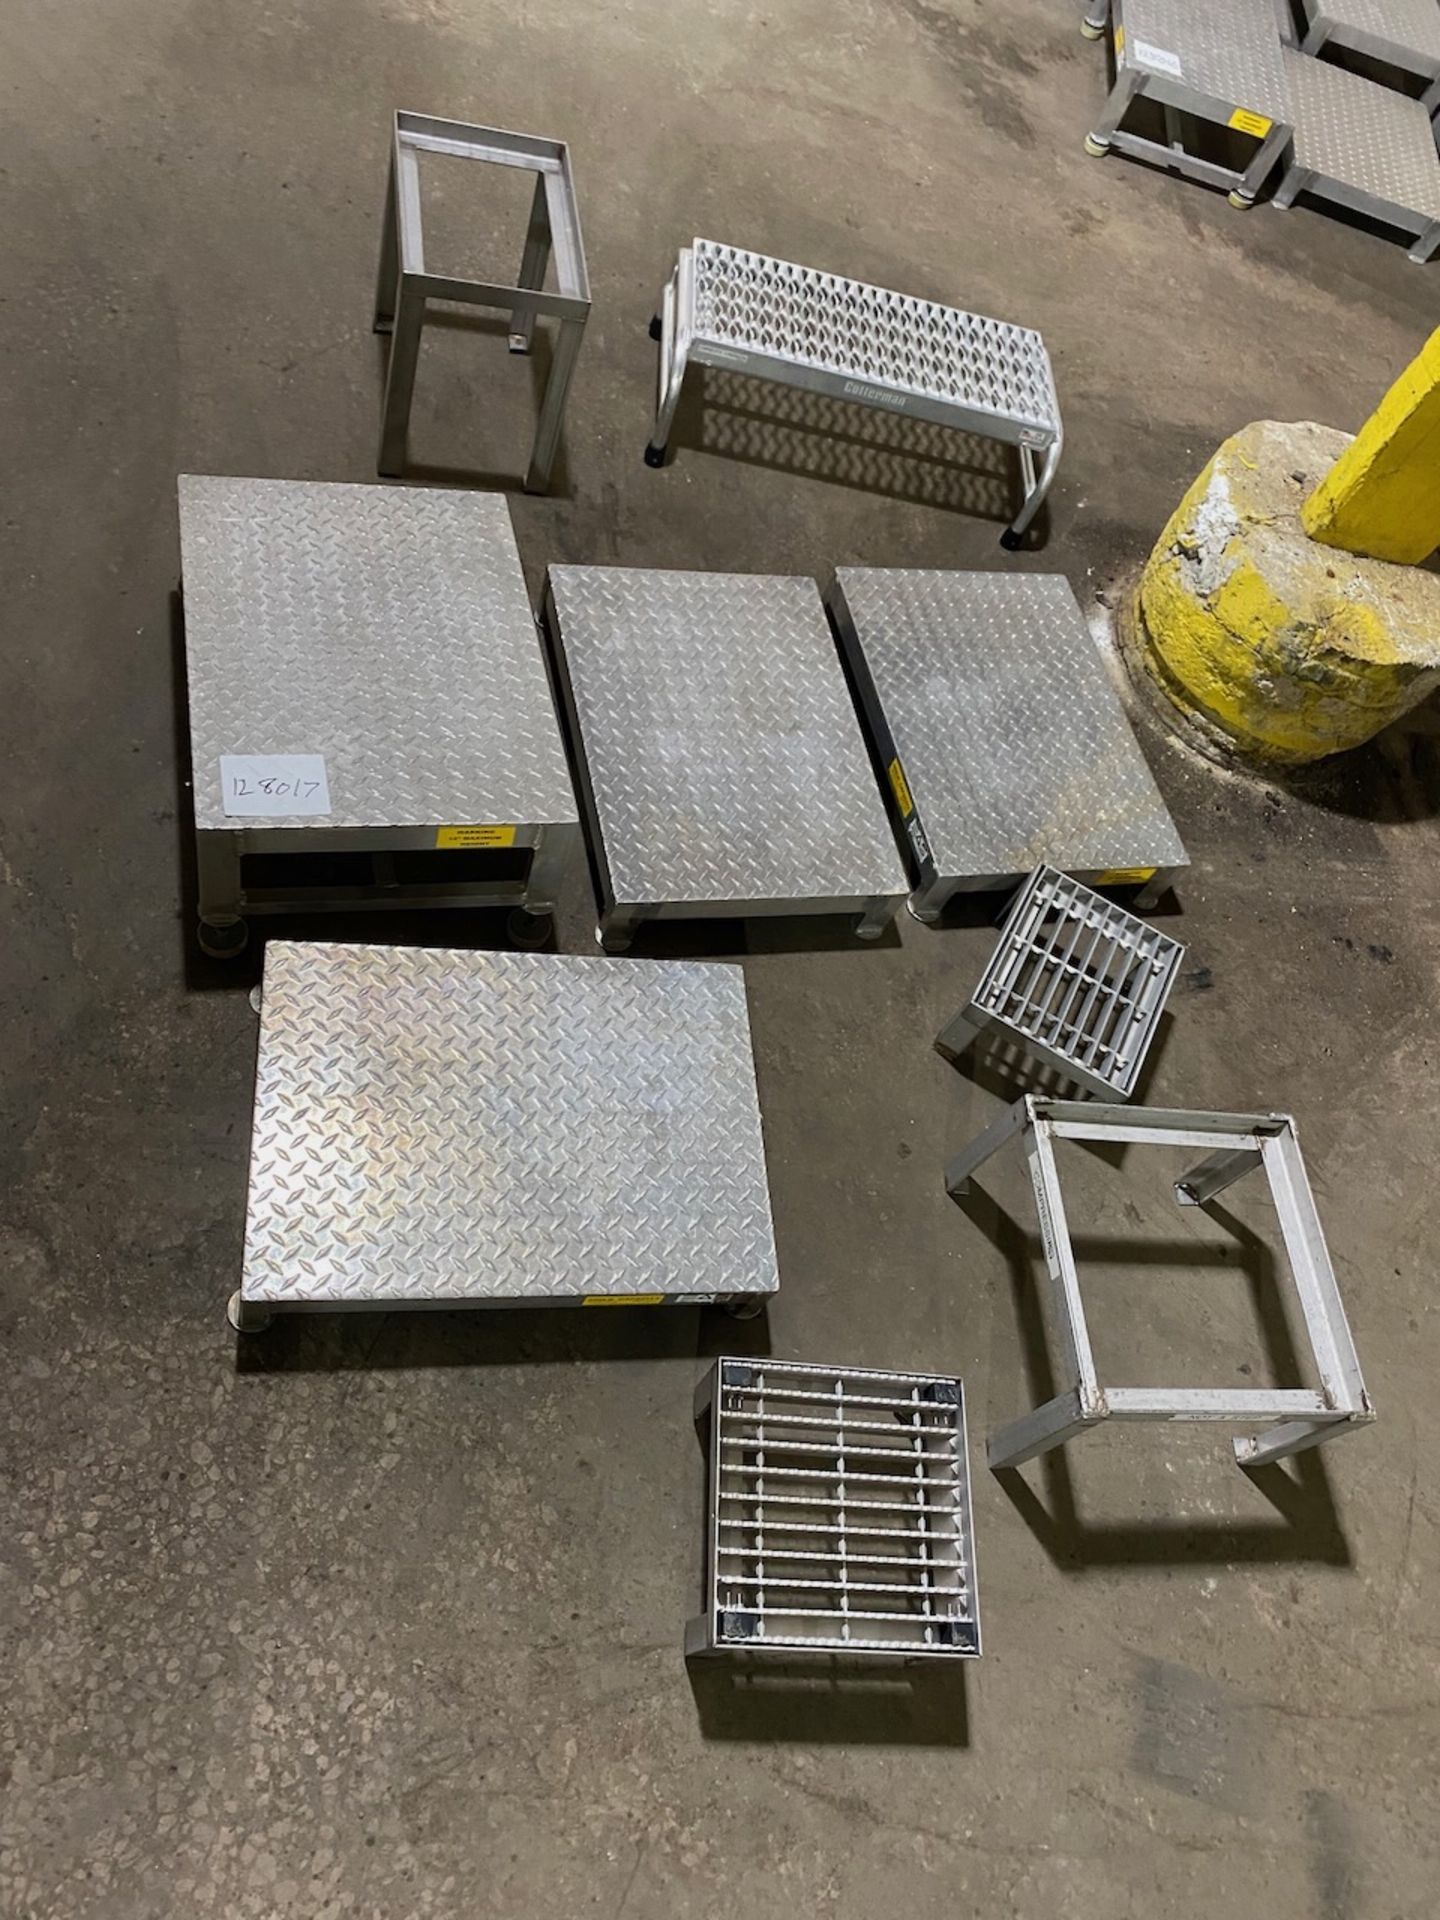 Lot of step stools.